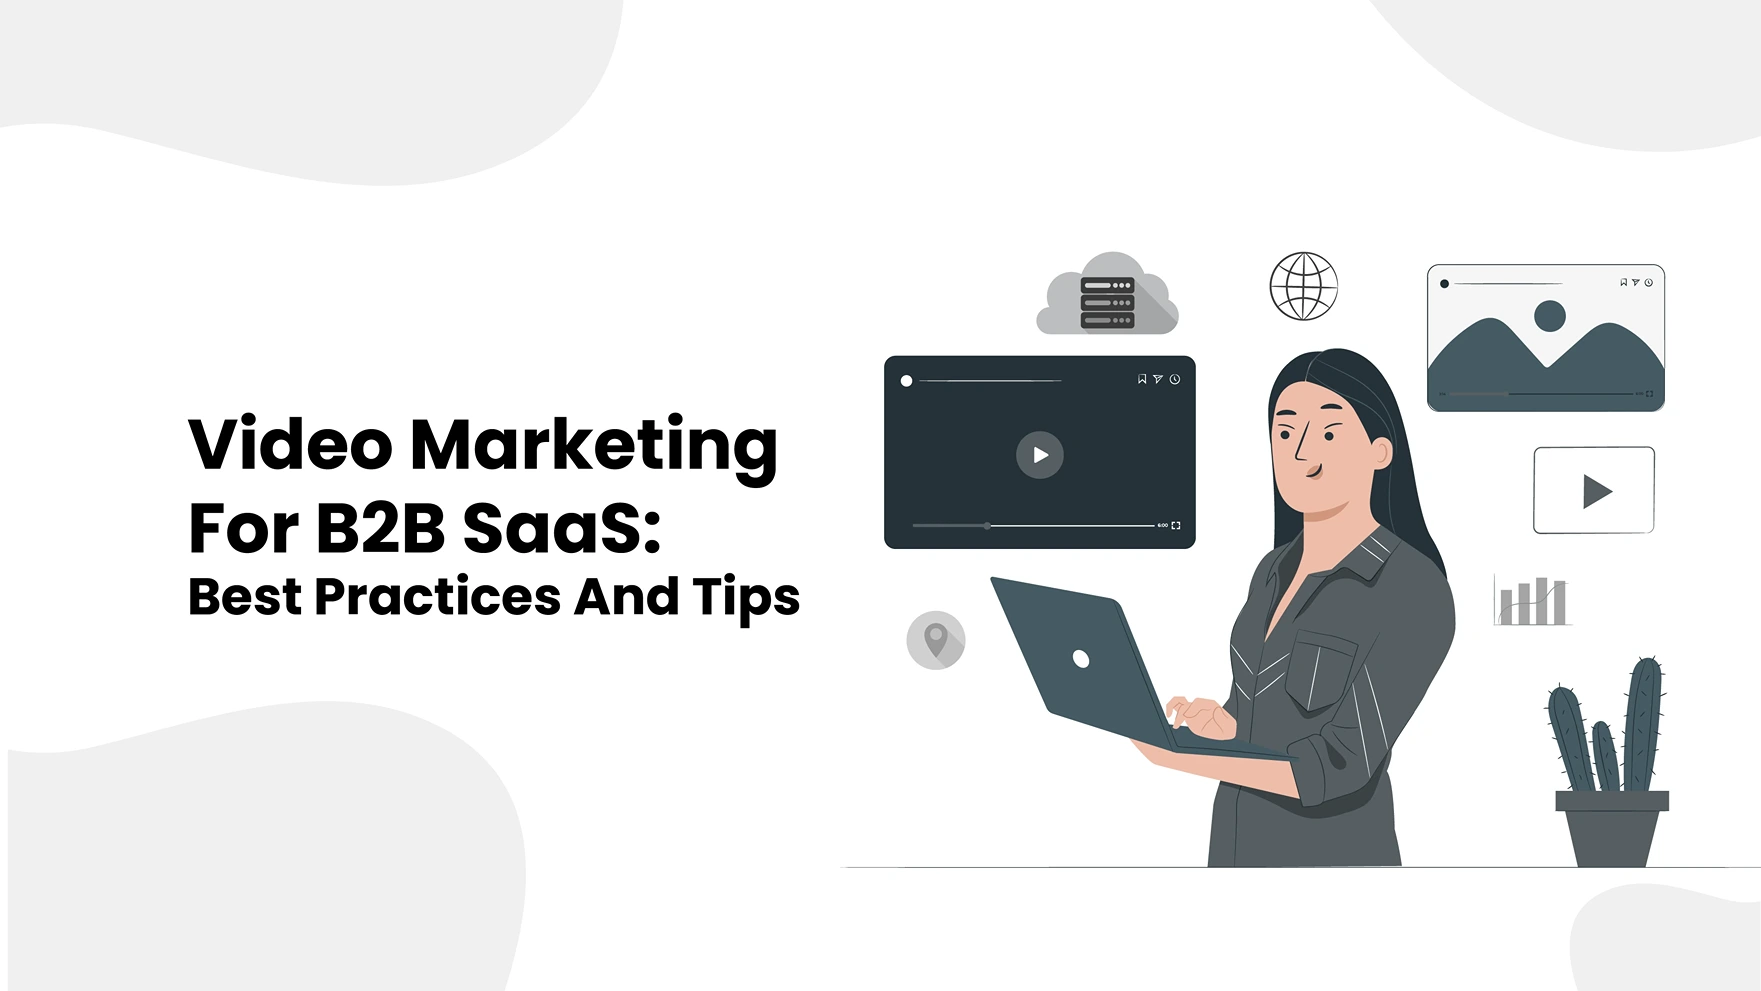 Video Marketing For B2B SaaS: Best Practices And Tips